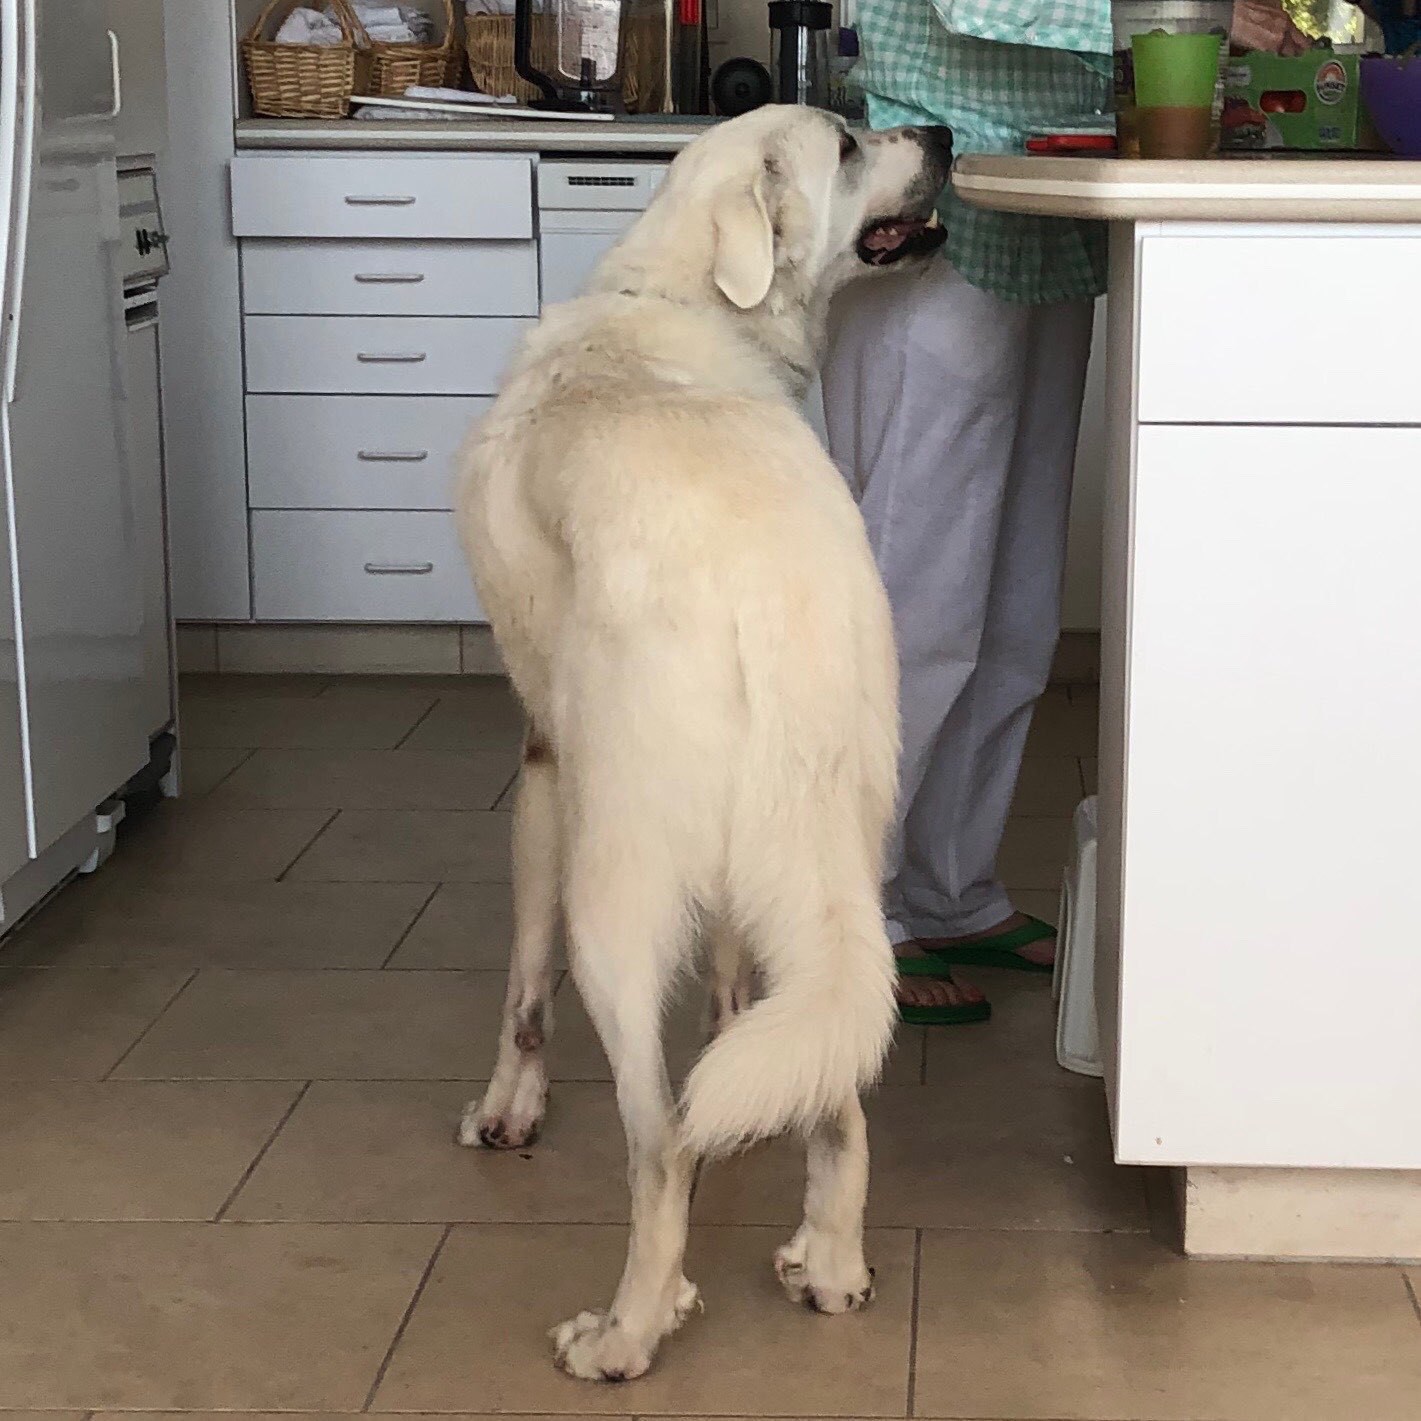 Large white dog longing for food in a kitchen.